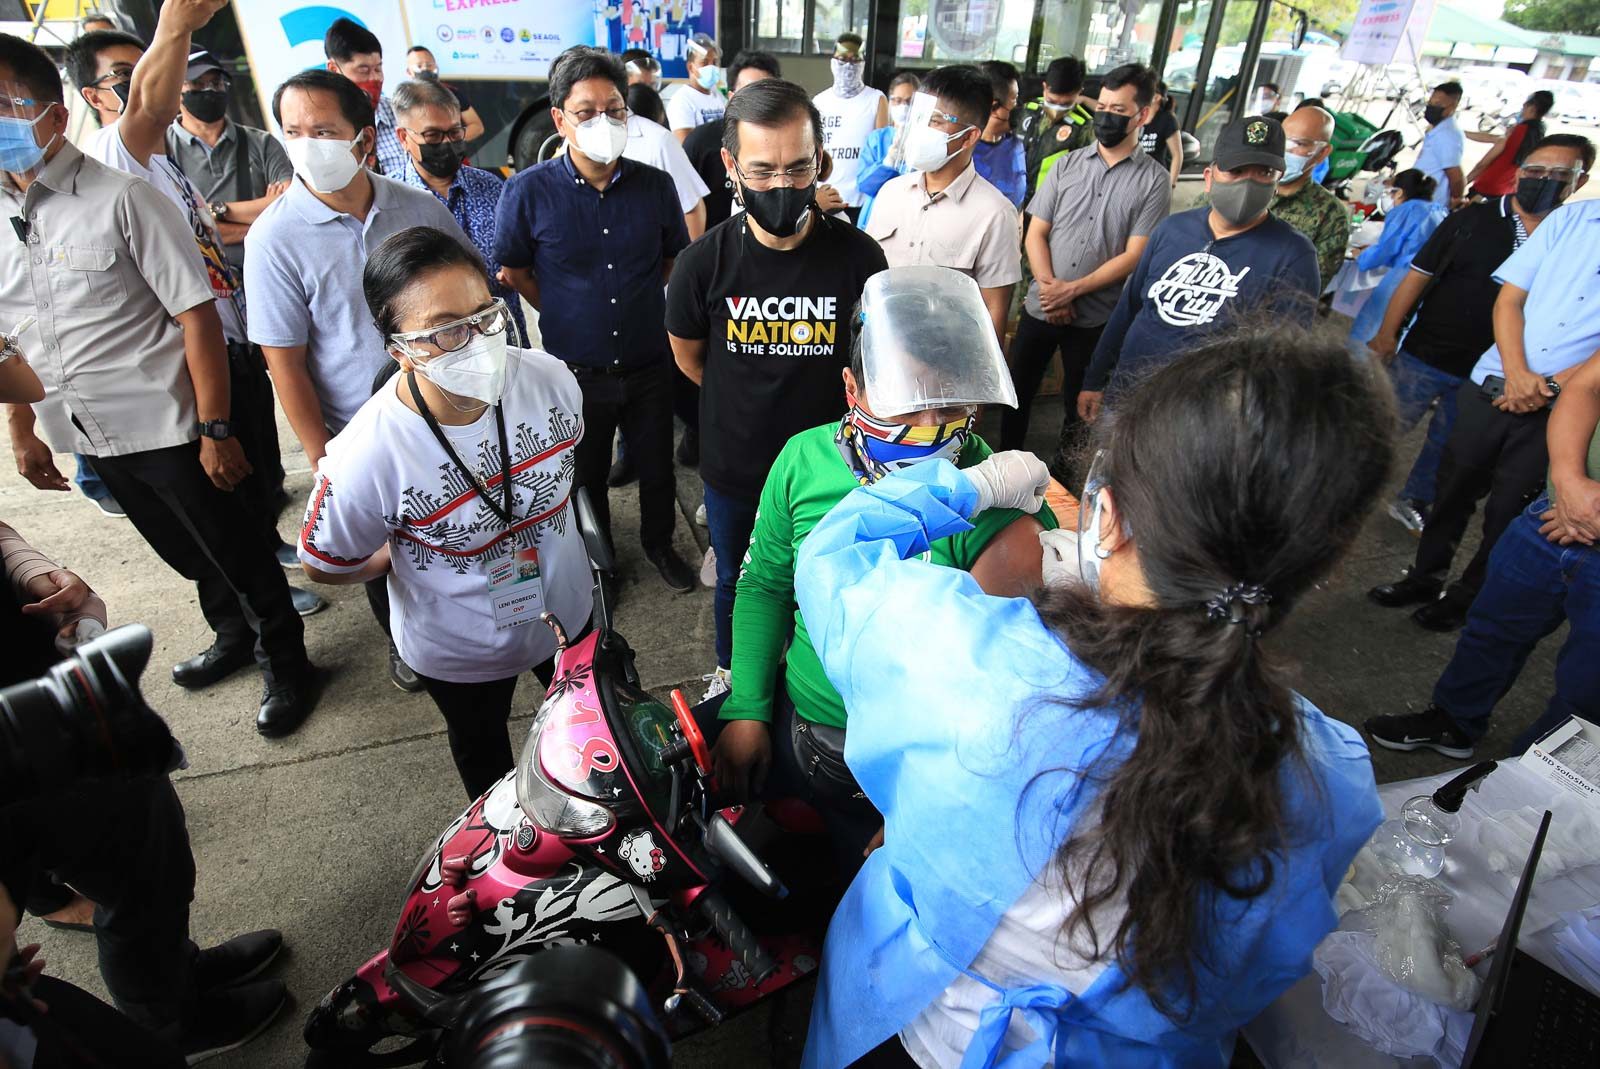 Robredo wants to bring Vaccine Express to other LGUs